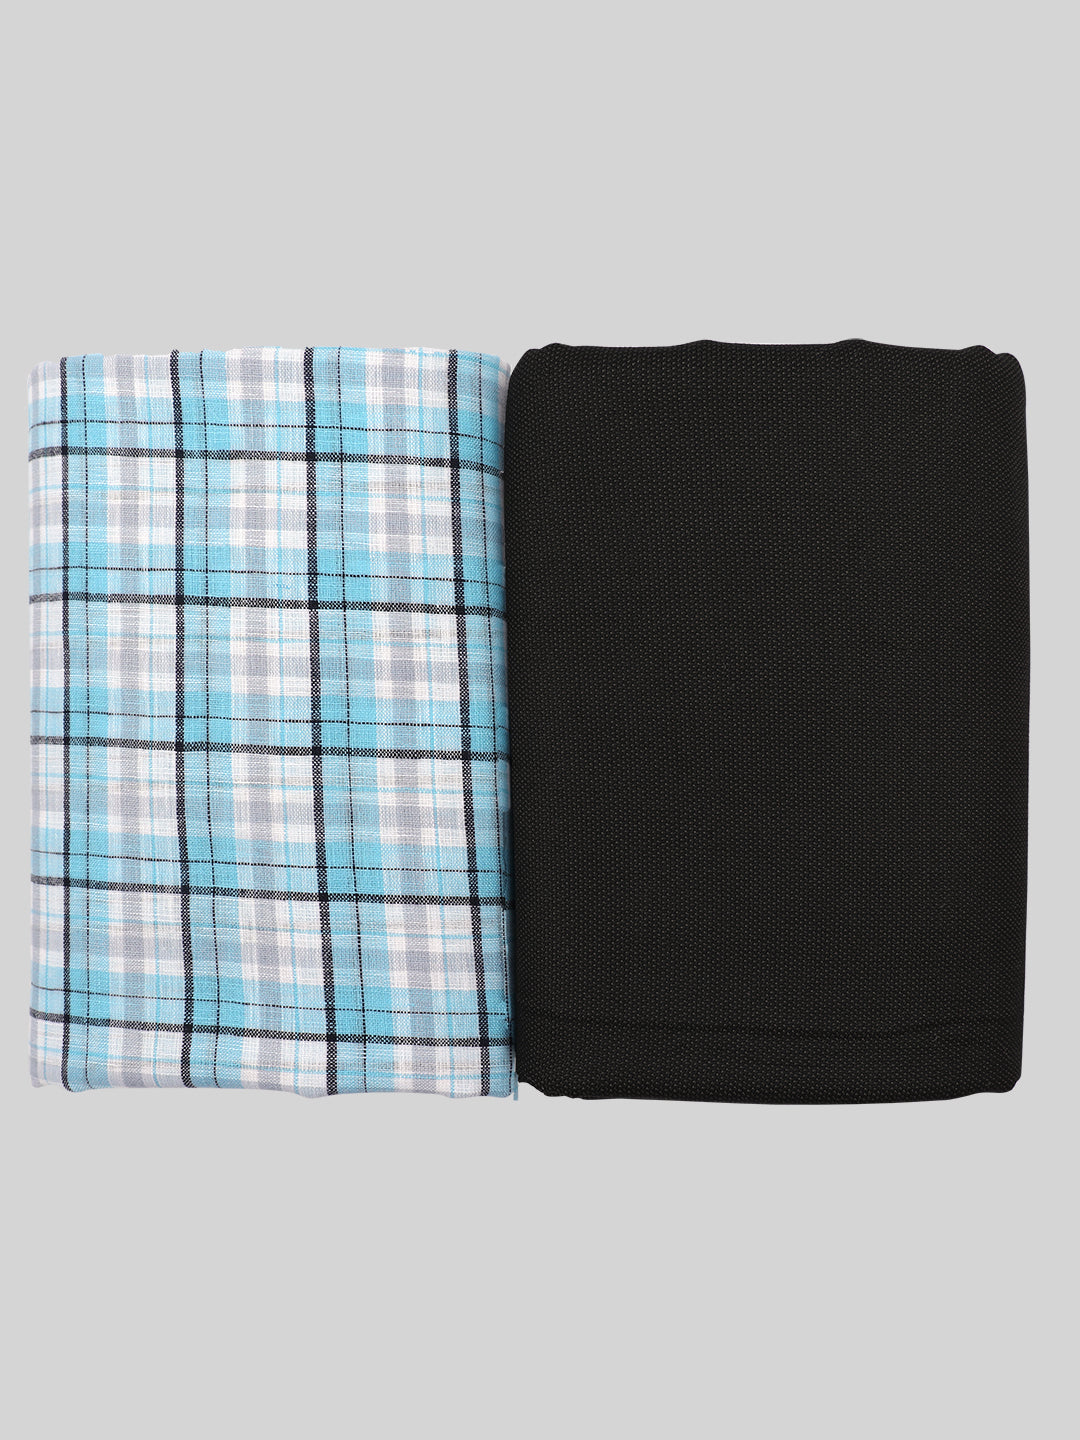 Cotton Checked Blue Shirting & Black Suiting Gift Box Combo RY26-Full view